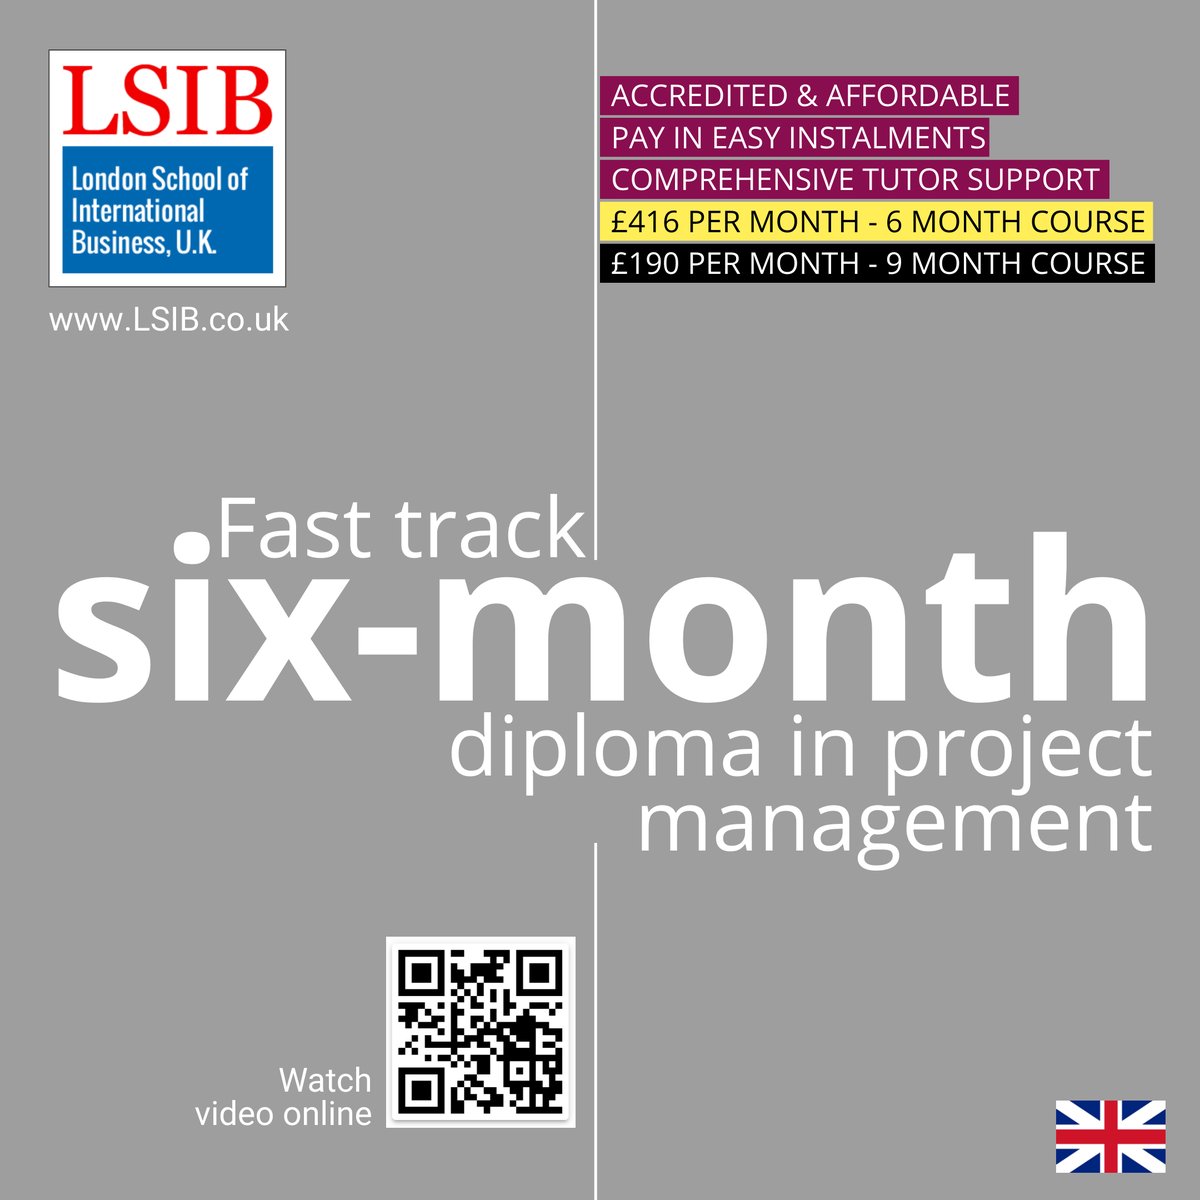 Expand your knowledge of project management with our Online Project Management Courses. Learn best practices and tools to succeed in your projects. Enroll now at LSIB.co.uk. #LSIB #ProjectManagement #OnlineLearning #LondonSchoolofInternationalBusiness  ...